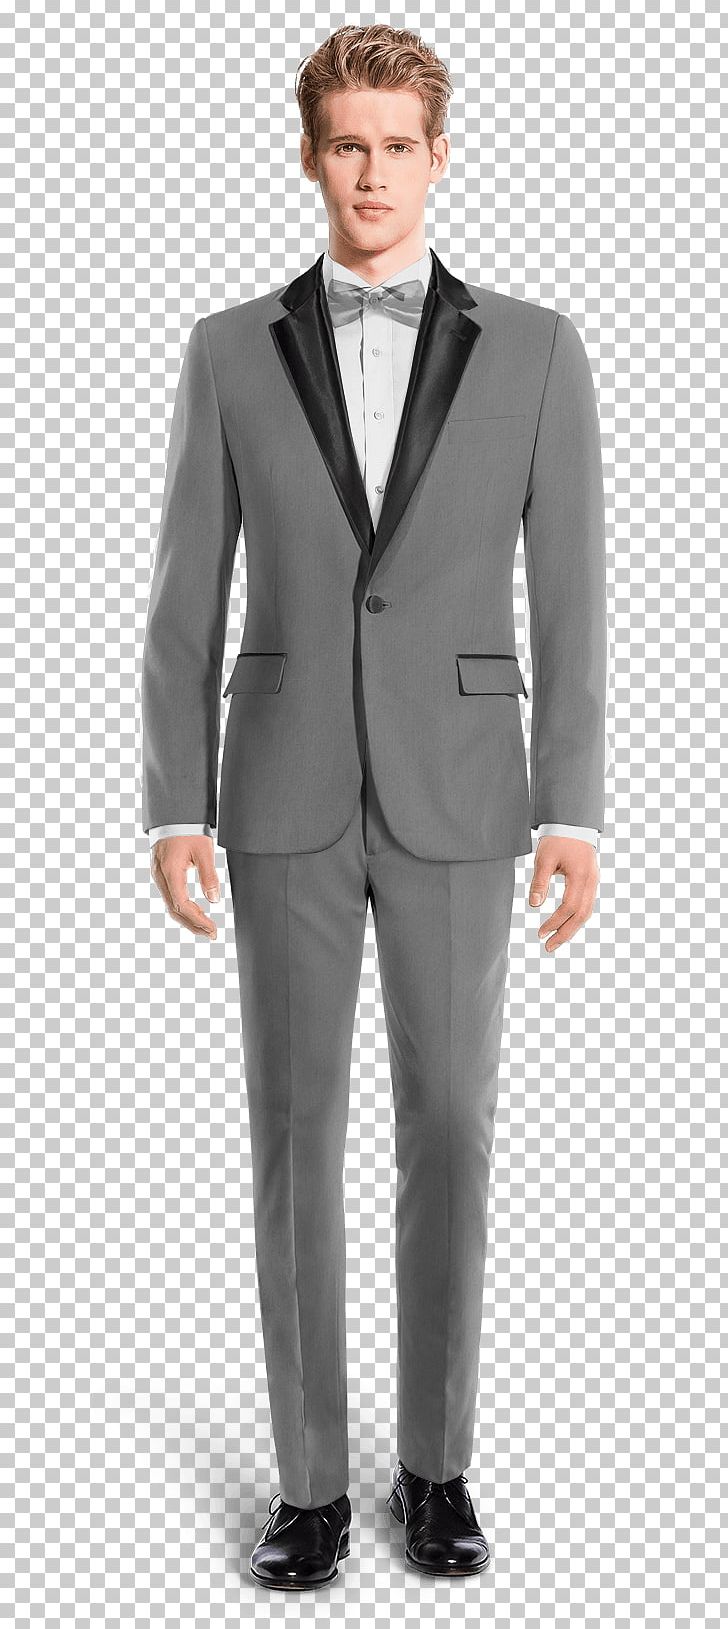 Suit Double-breasted Jacket Coat Tweed PNG, Clipart, Blazer, Business, Businessperson, Clothing, Coat Free PNG Download